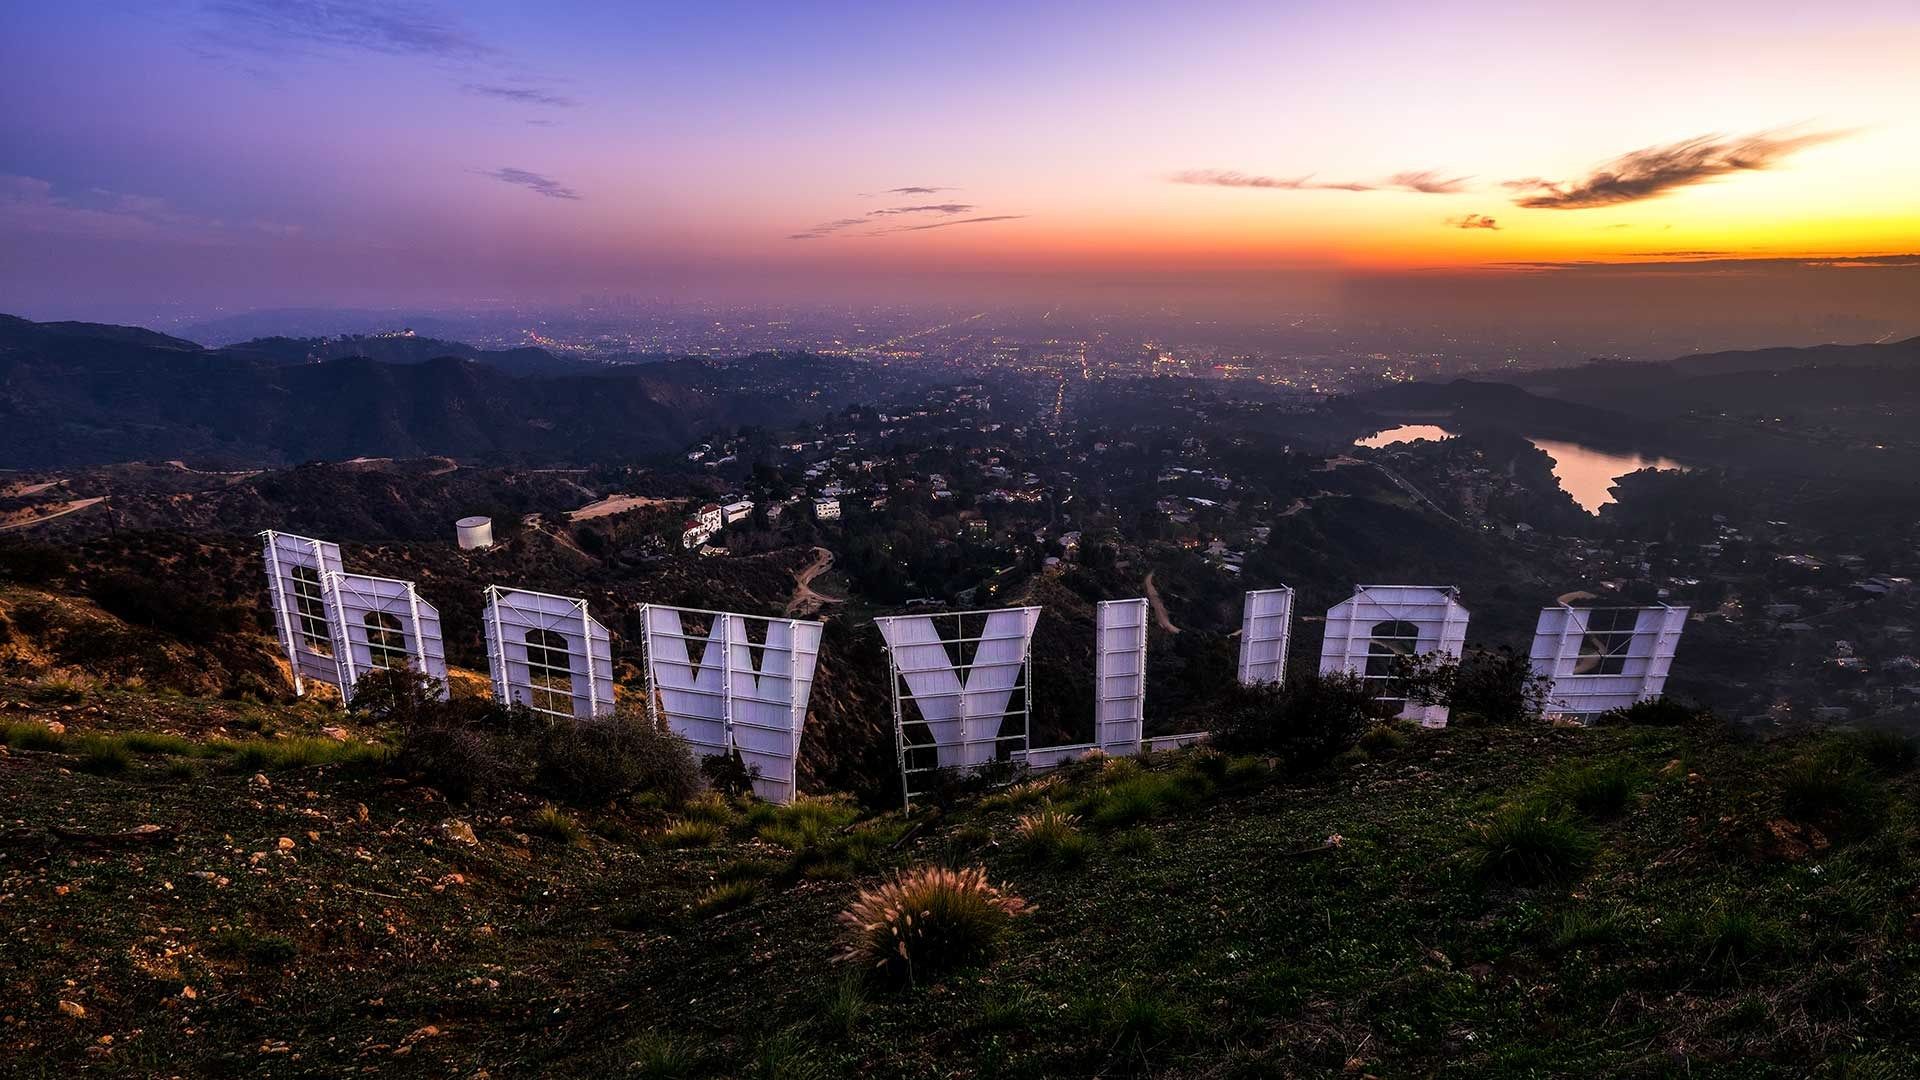 A sunset view of the hollywood sign - Los Angeles